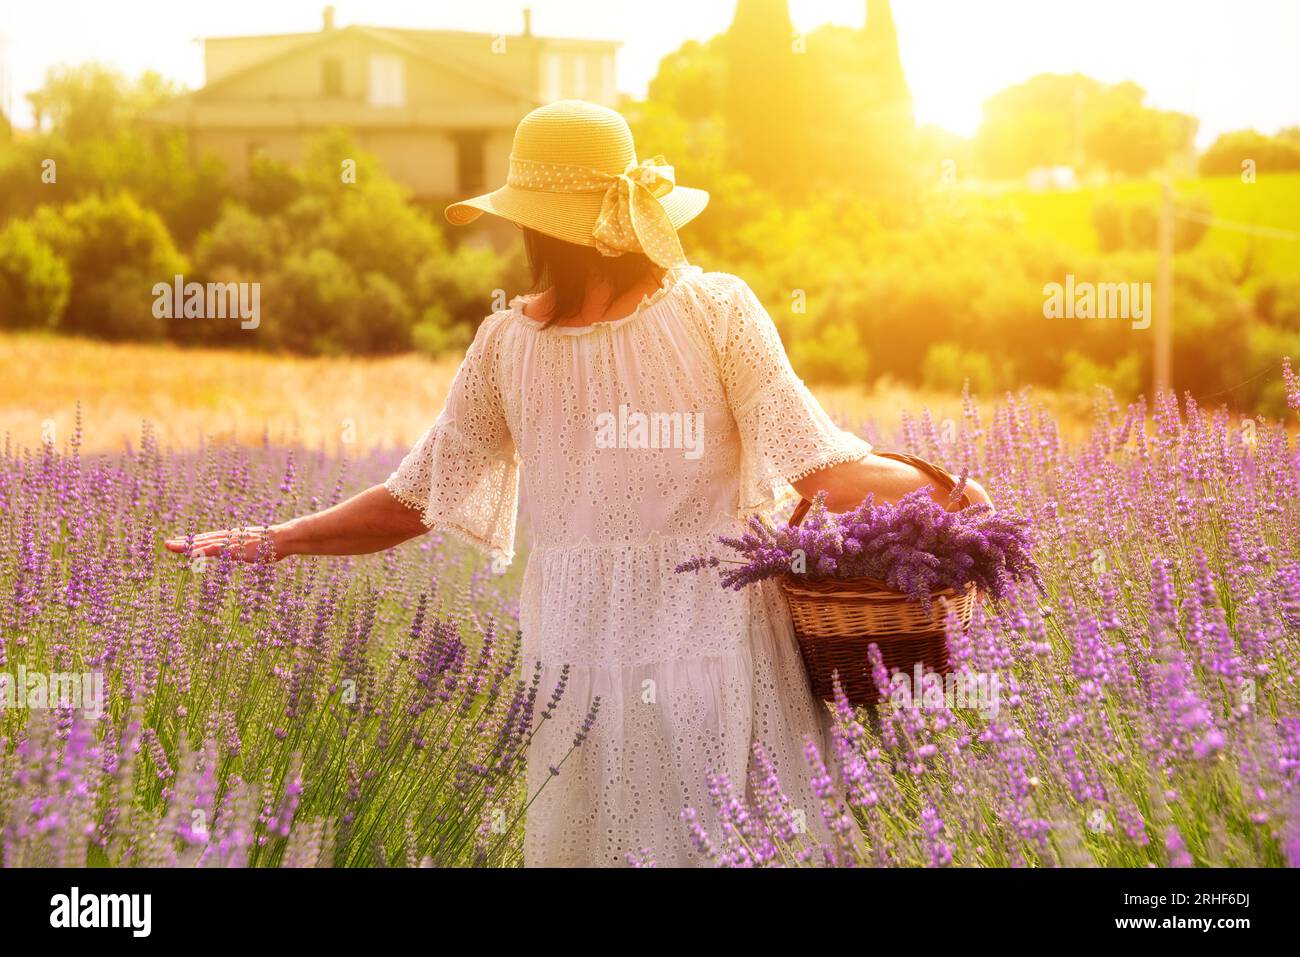 Girl in white dress and straw hat with basket walking in lavender field Stock Photo